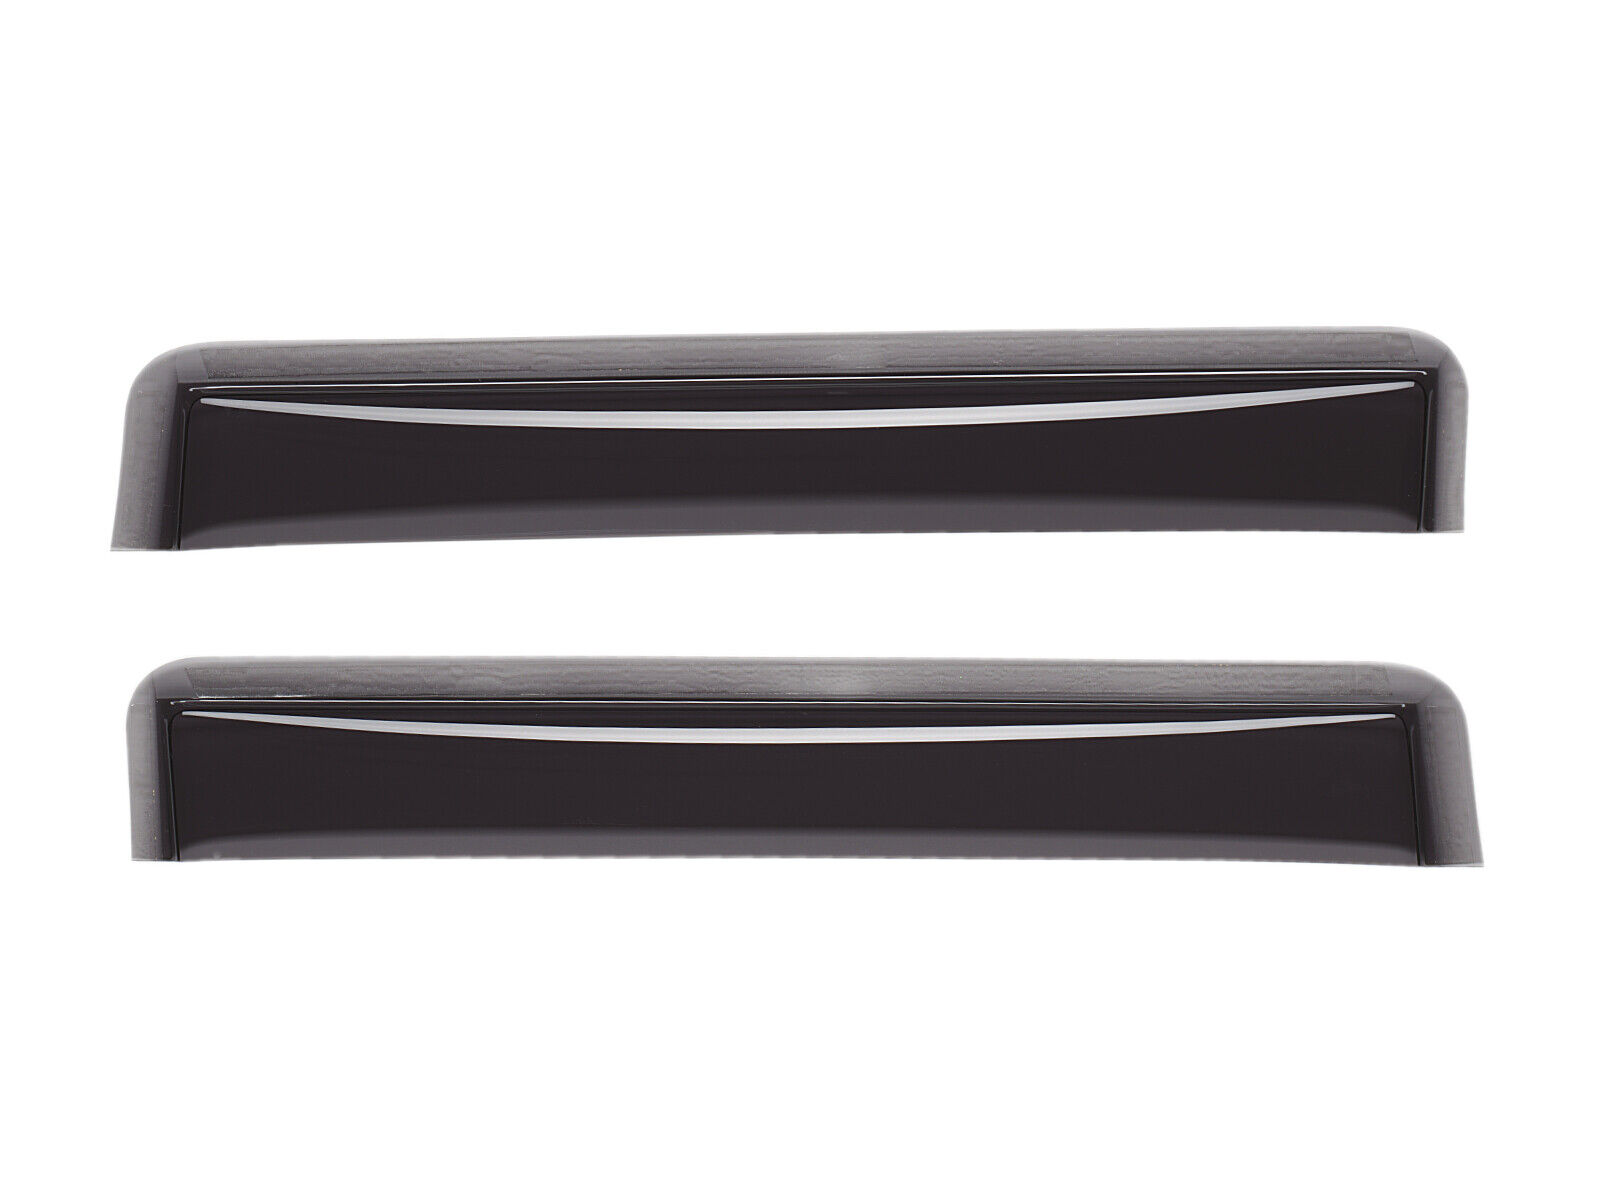 WeatherTech Side Window Deflectors for 1994-2004 Chevy S-10 Extended Cab 87018